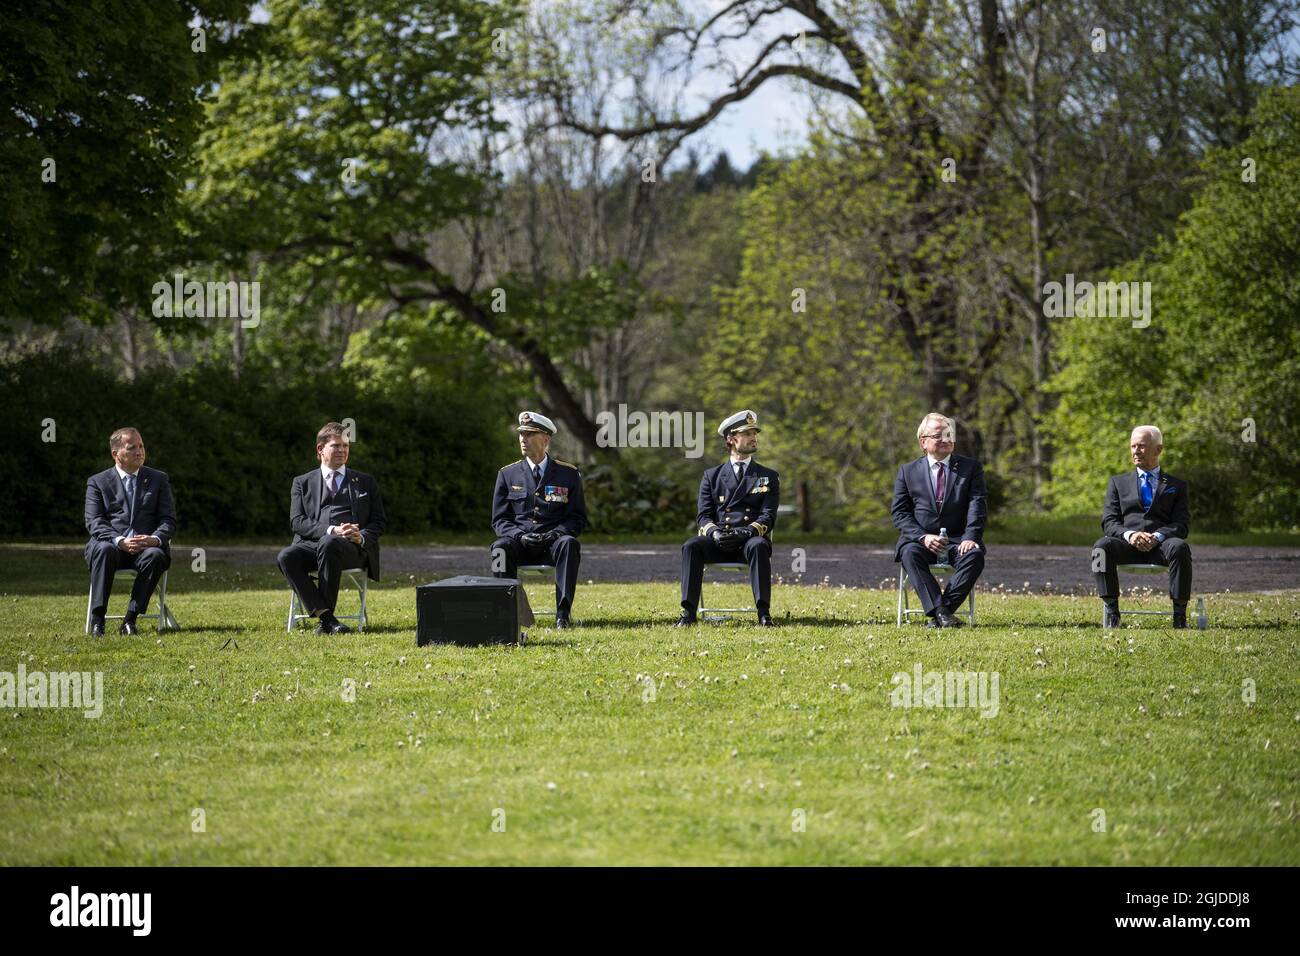 Prime Minister Stefan Lofven, Andreas Norlén, Speaker of the Parliament, General Micael Bydén, Prince Carl Philip, Peter Hultqvist, Minister for Defence and Sverker Goranson, chairman of the Swedish Veterans Association, during Sweden's Veterans Day at the Kungsangen regiment in Stockholm, Sweden, May 29, 2020. Photo: Pontus Lundahl / TT / code 10050  Stock Photo